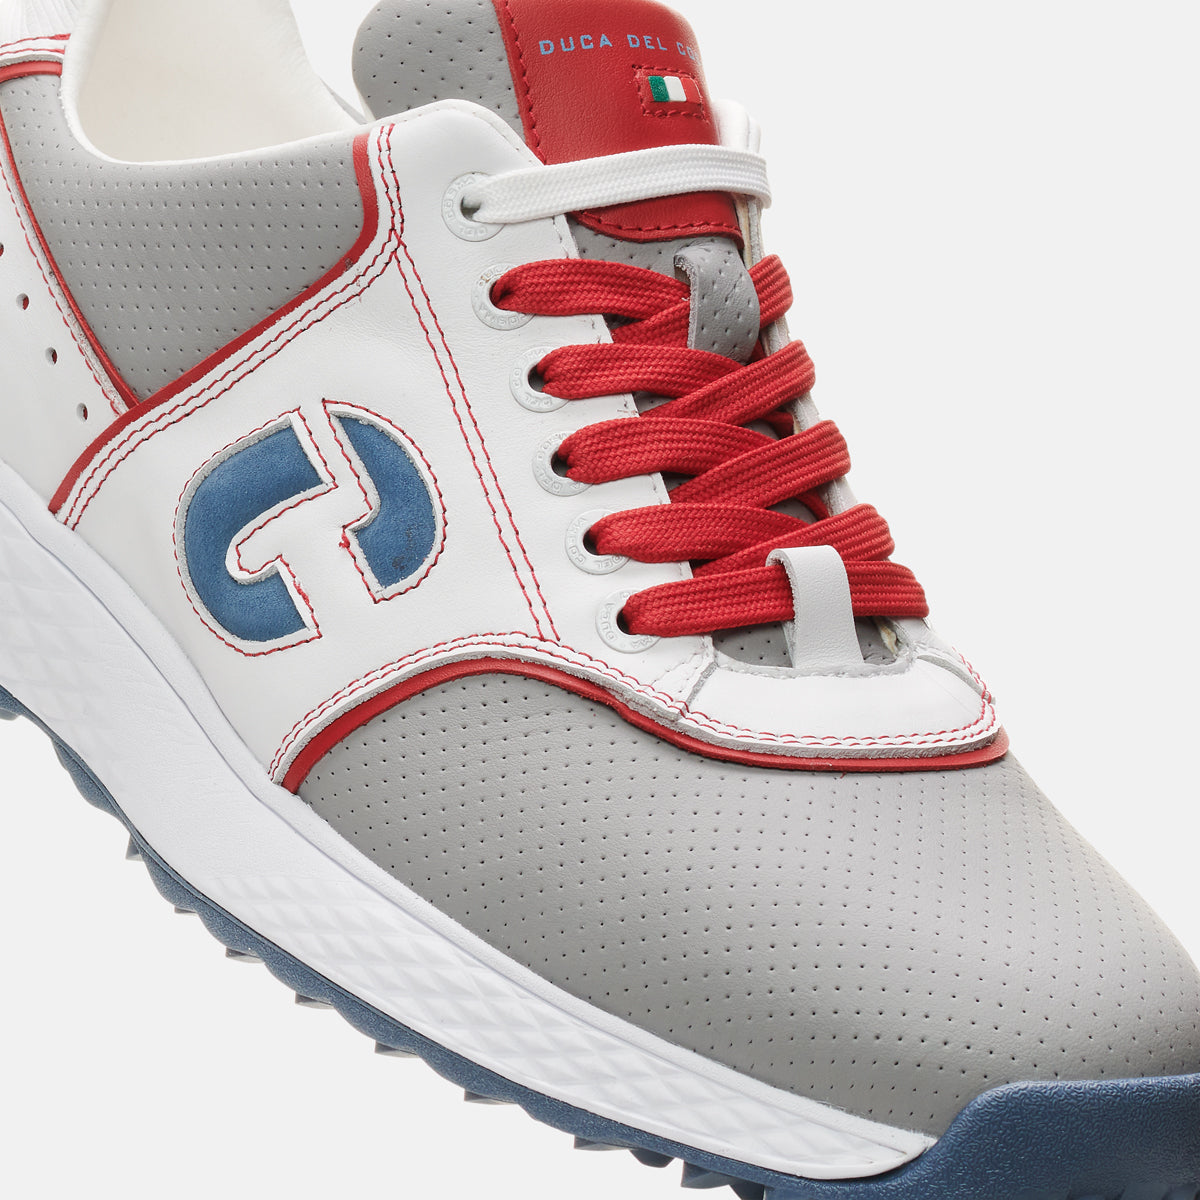 Positano grey mens Golf Shoes Duca del Cosma Waterproof best golf shoe for the golf course